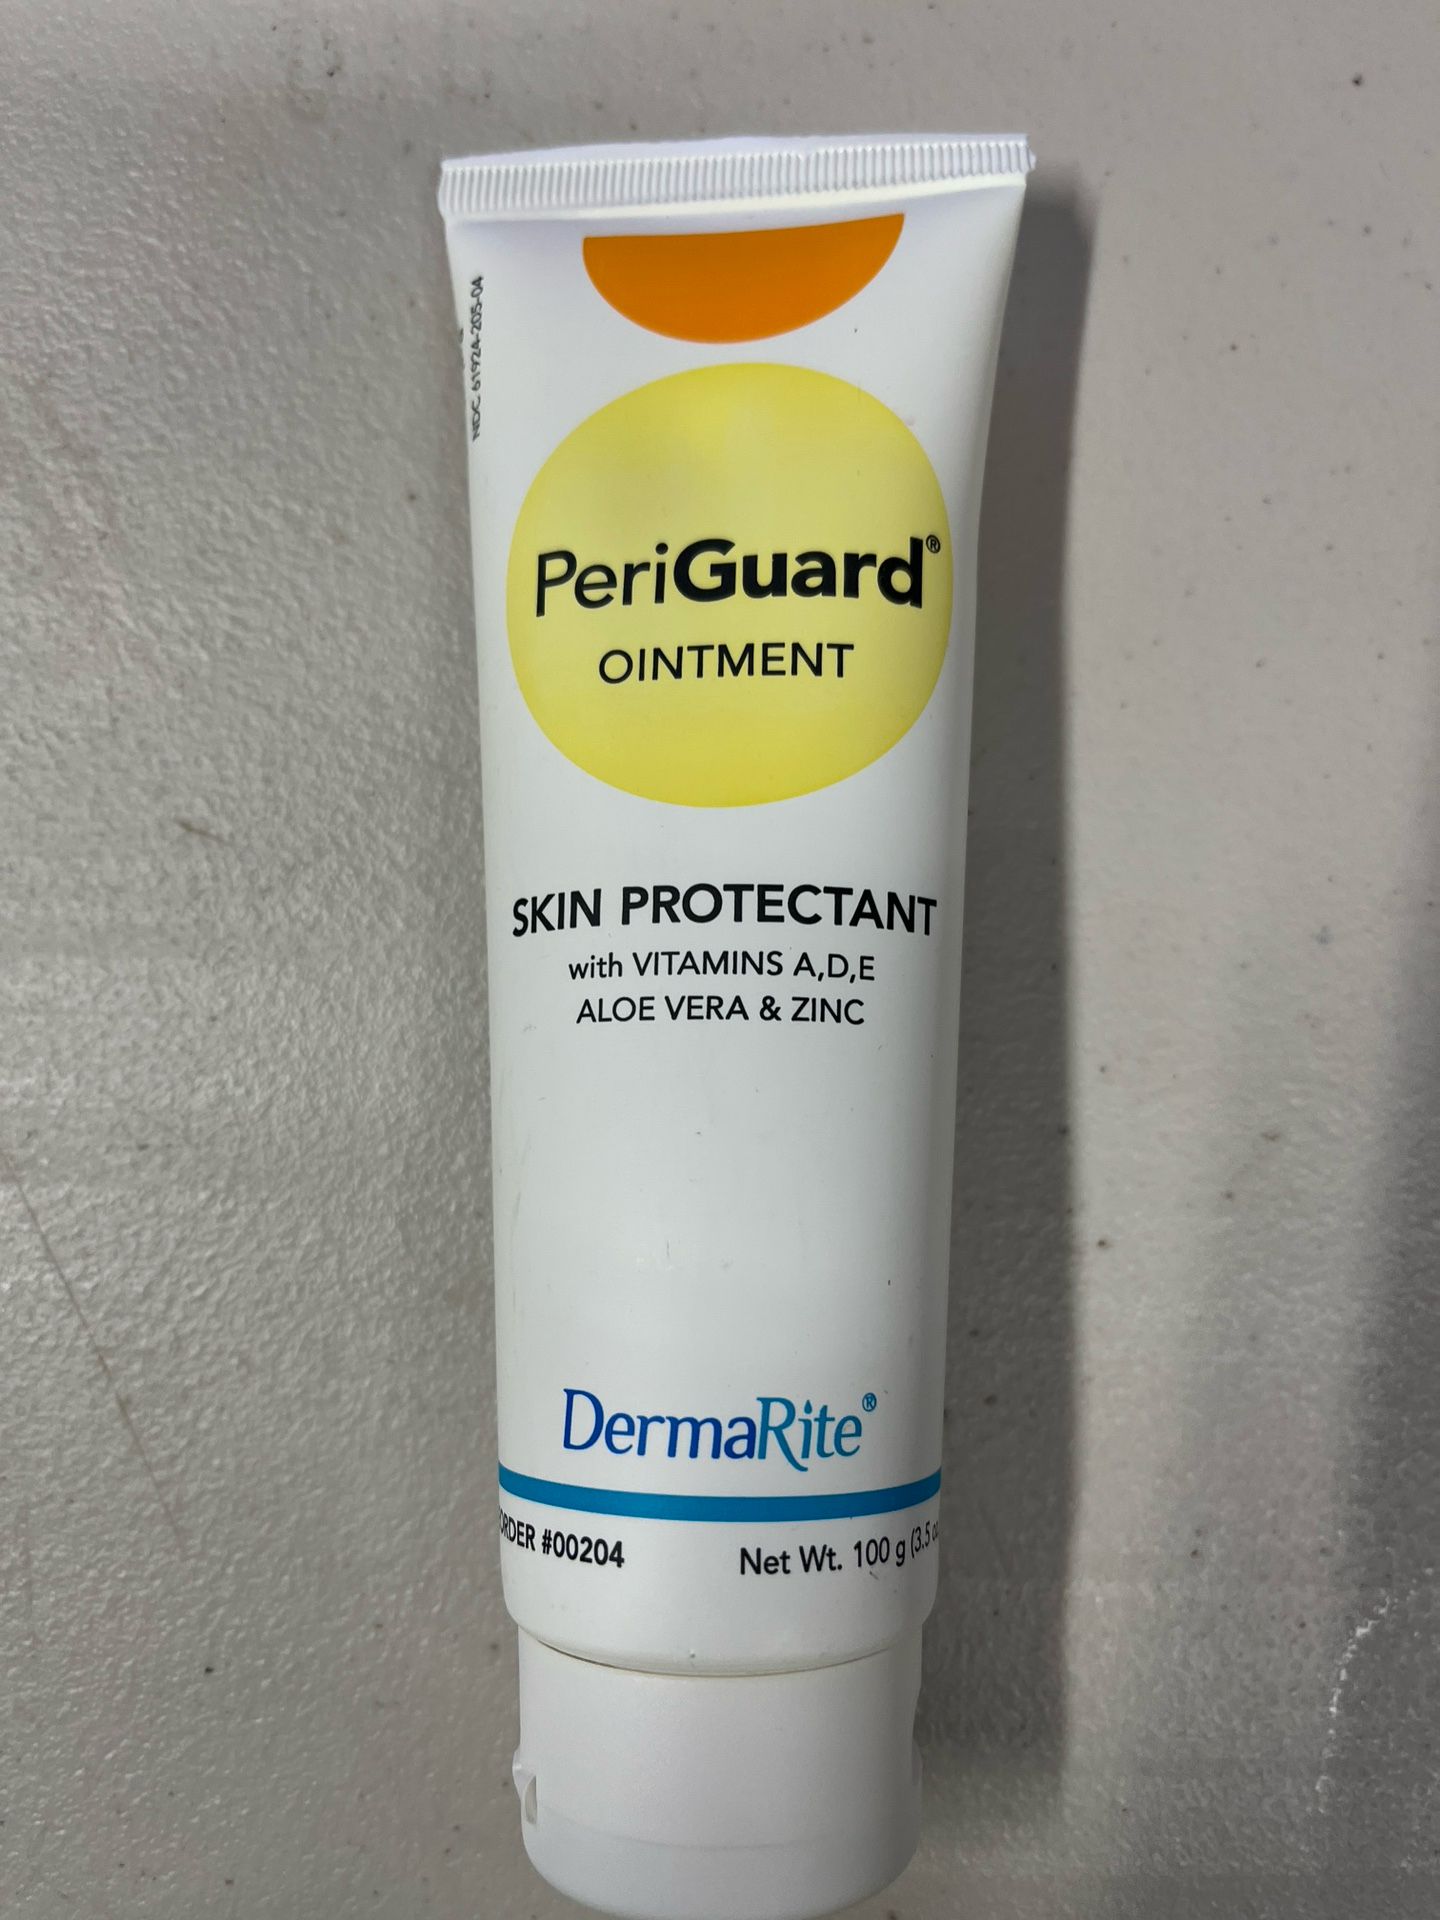 Periguard Ointment Skin Protectant 100g 6 units